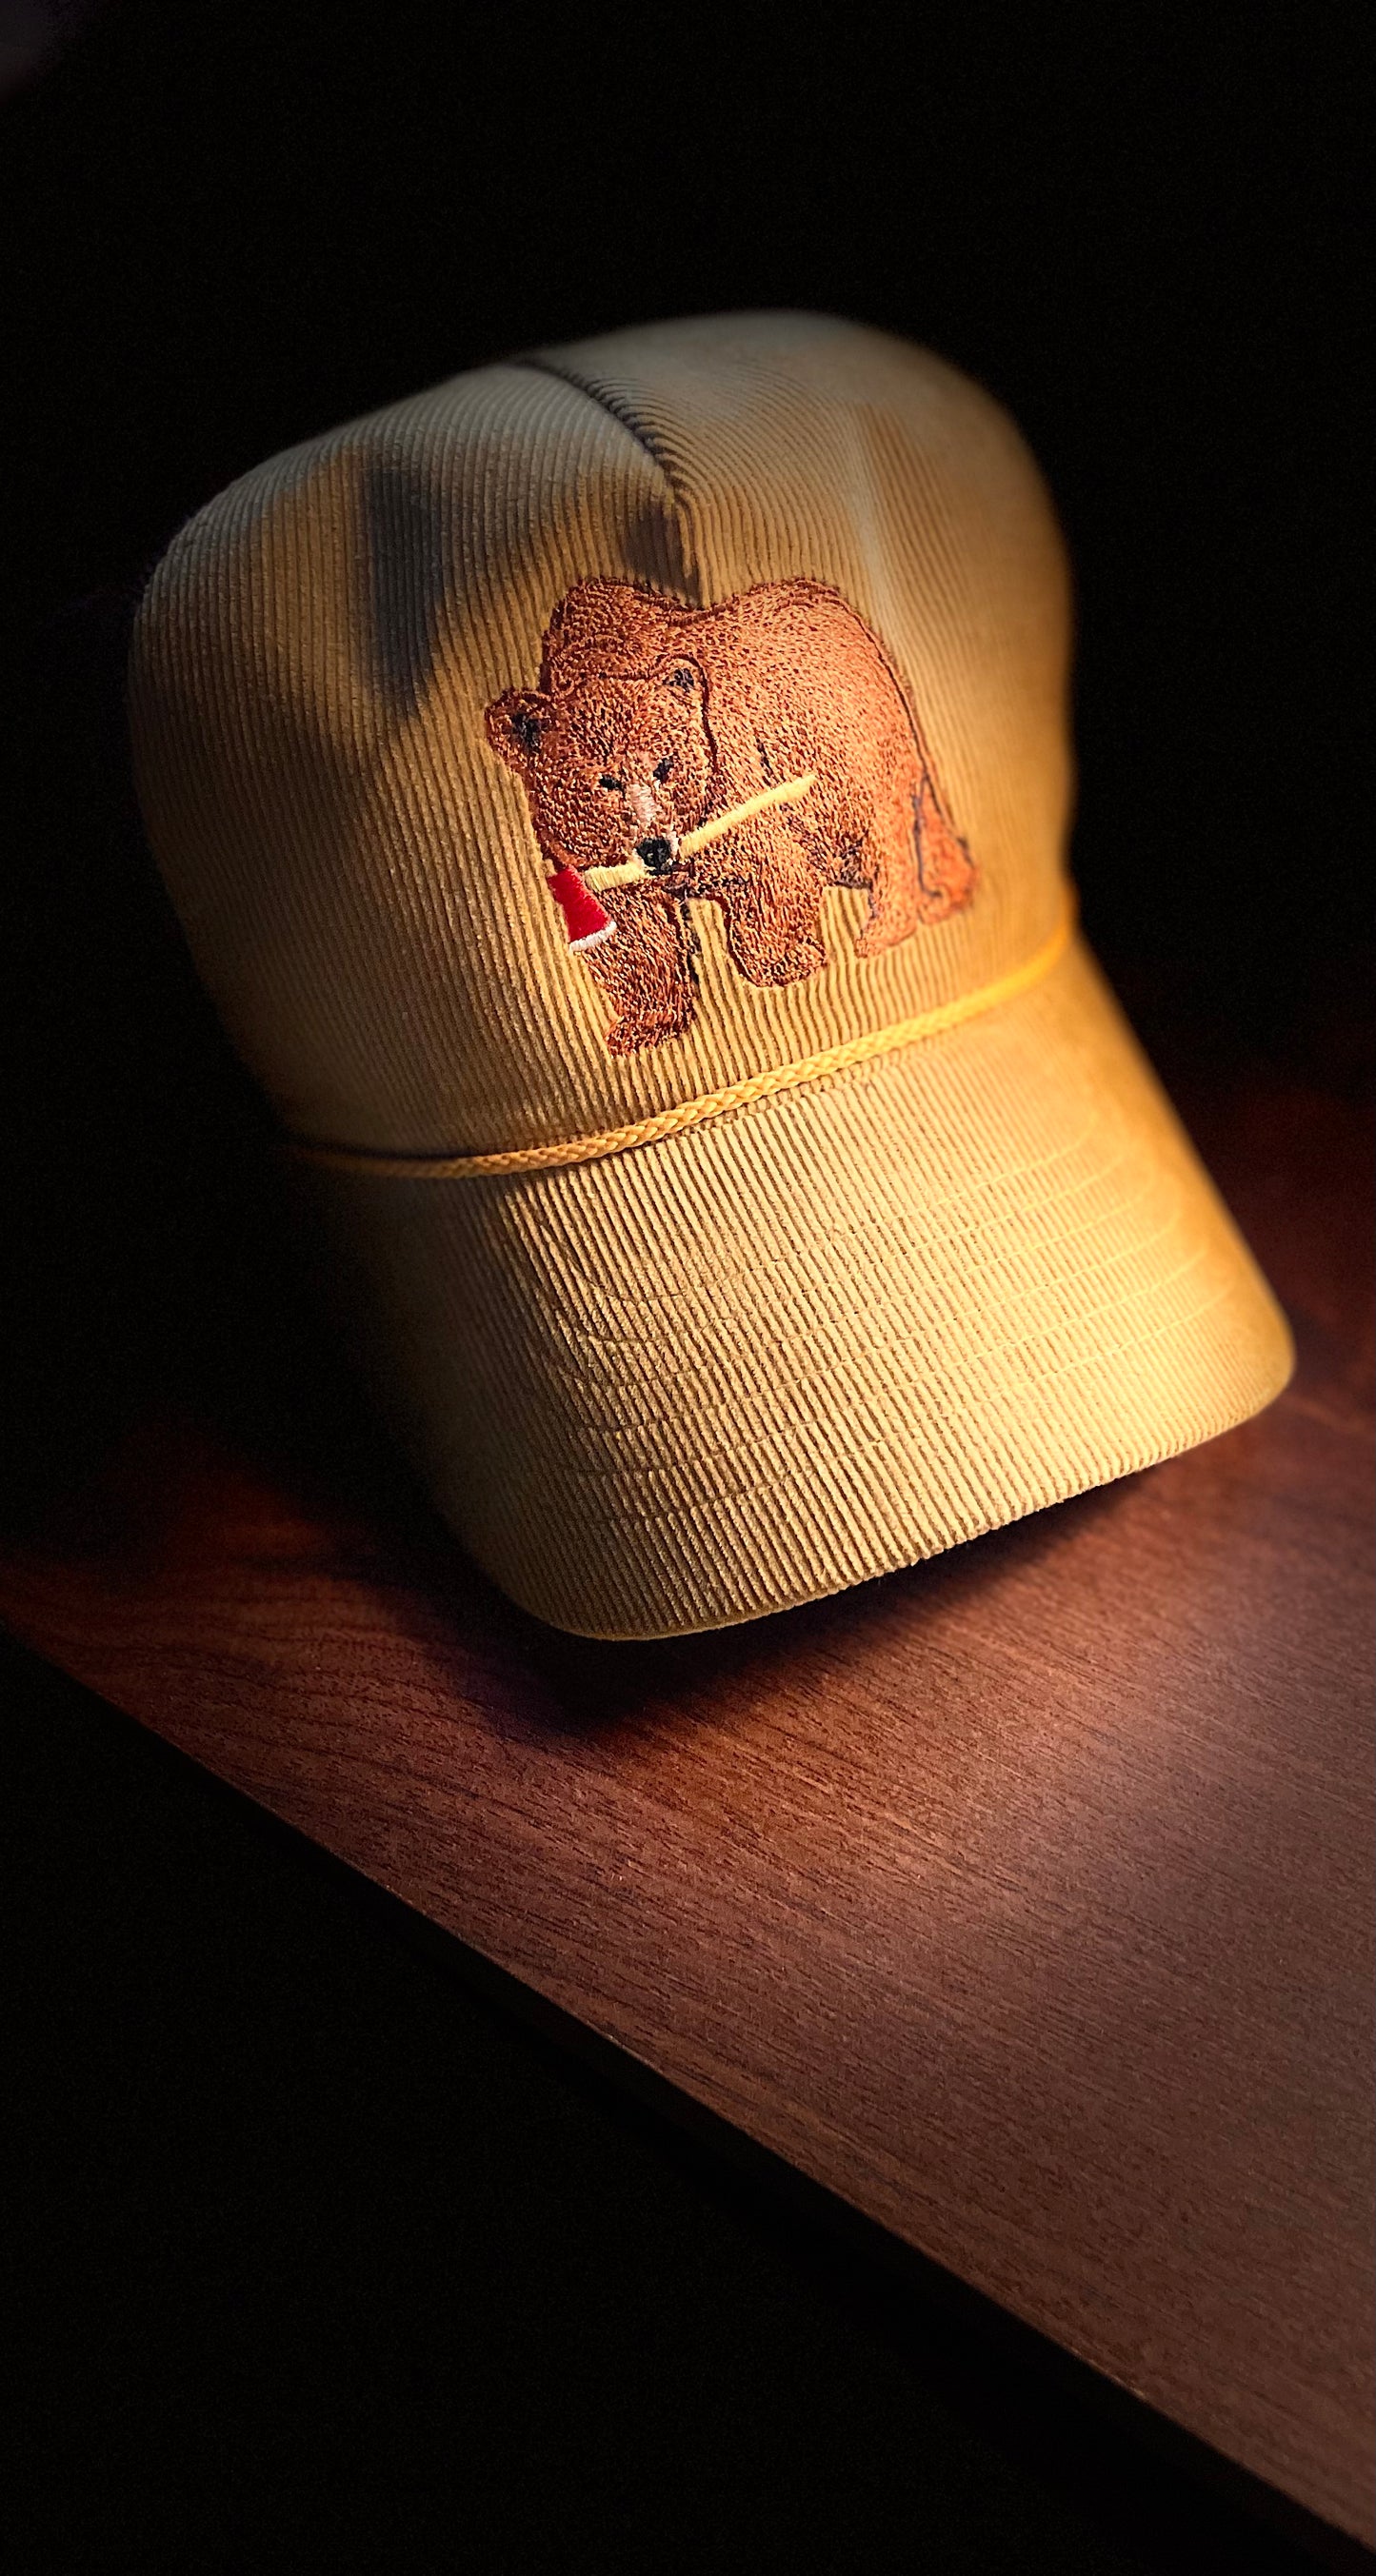 Stumptown Axes Bear Hat - Embroidered